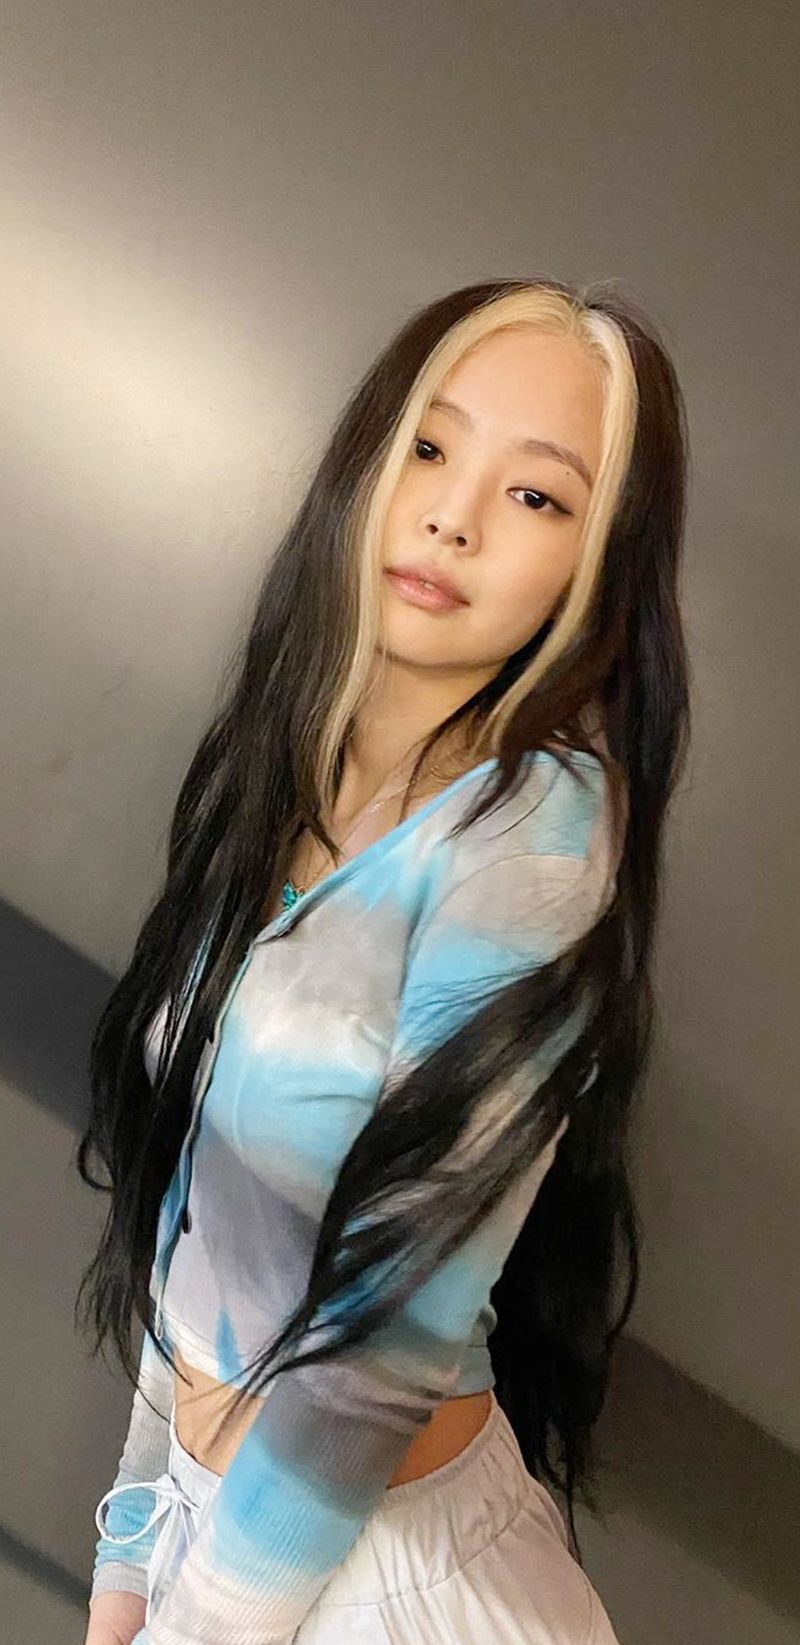 Lisa of Blackpink with long straight hair with blonde highlights - Jennie